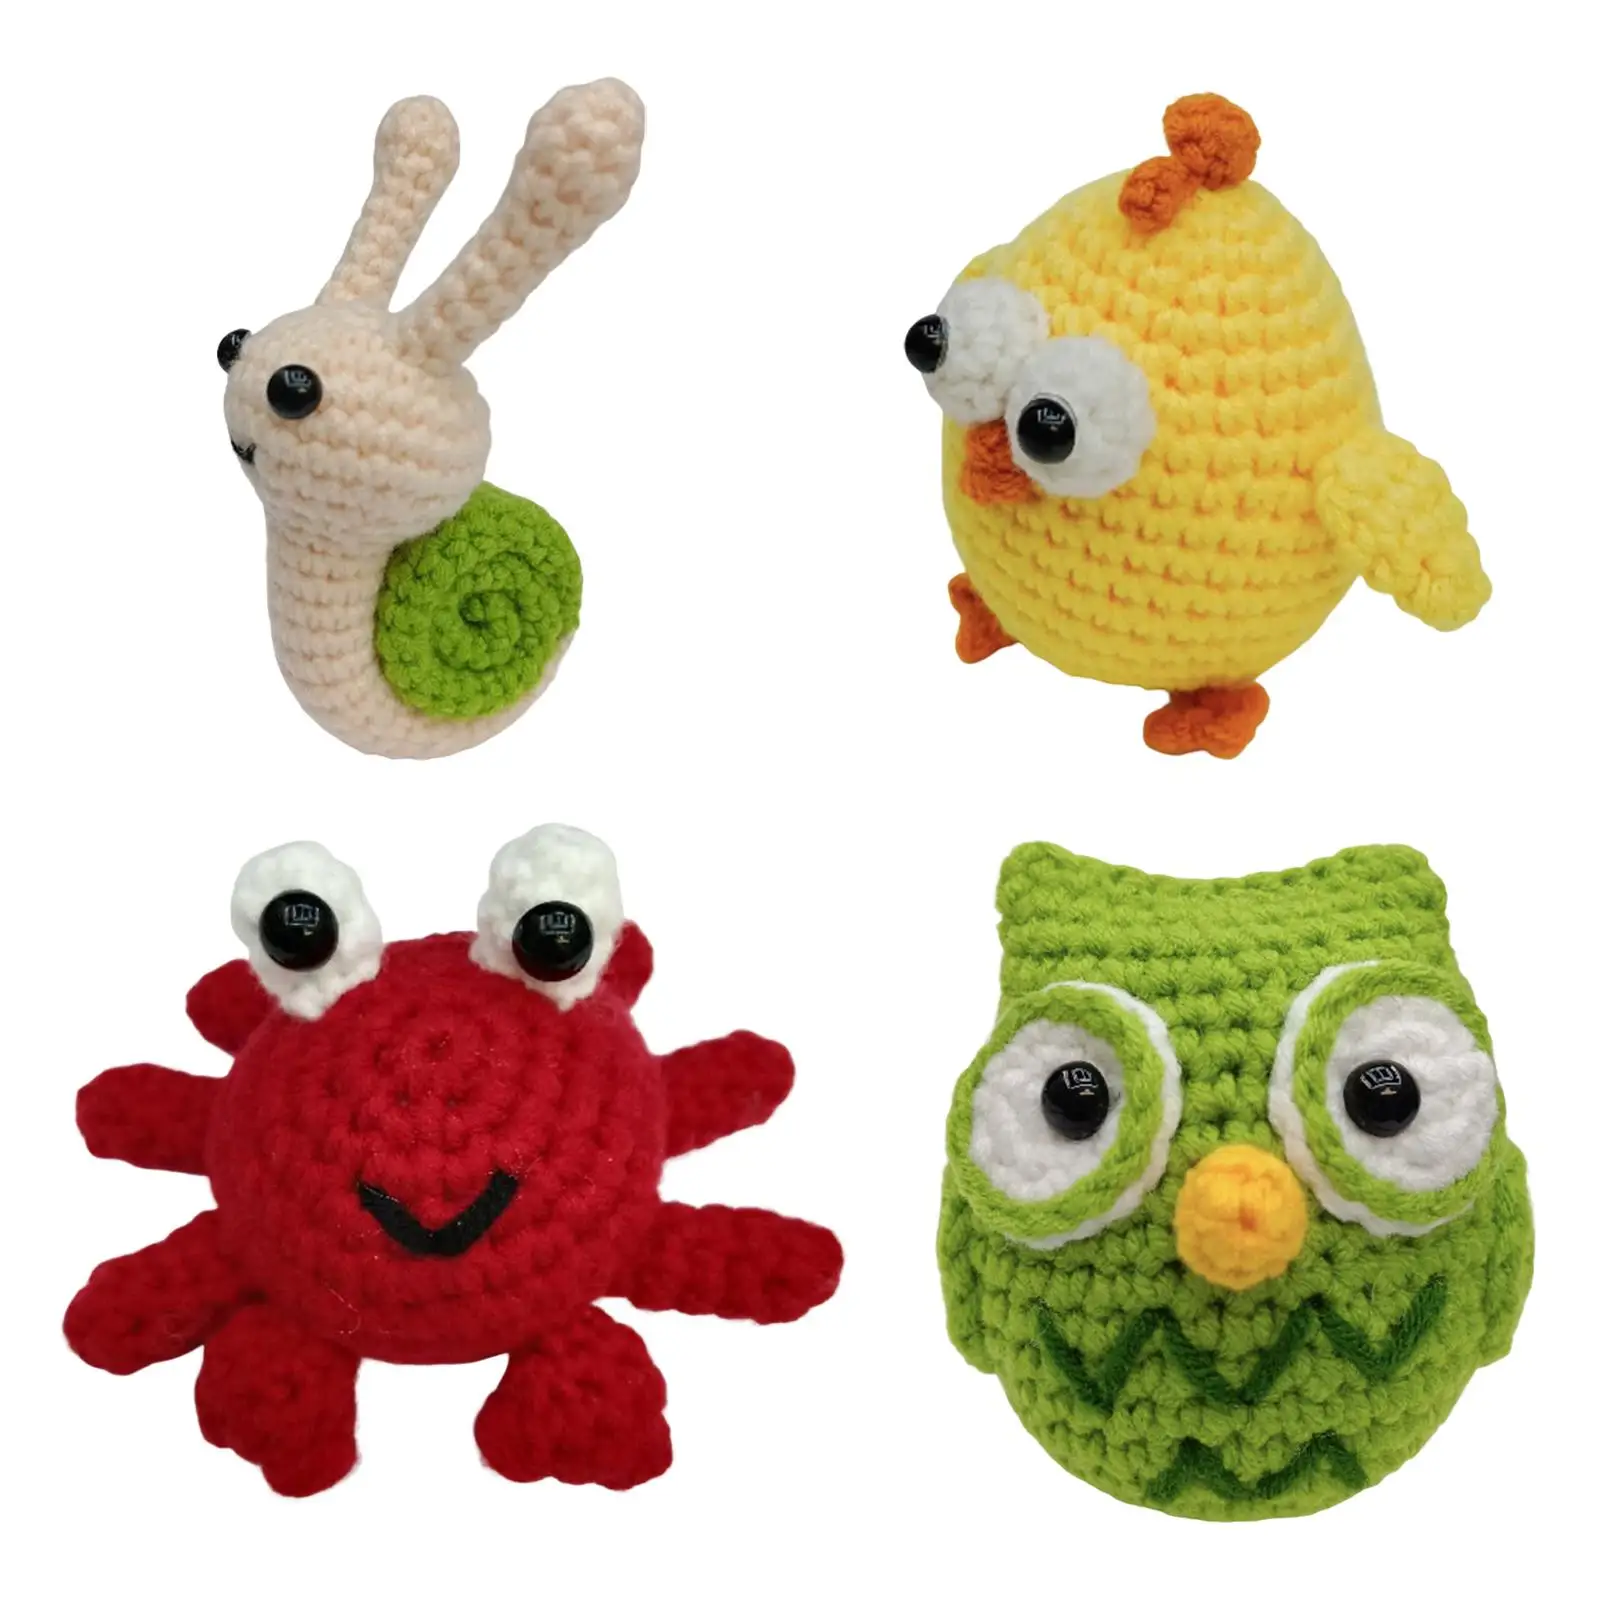 Handmade DIY Crochet Make Your Own Doll Crocheting Craft Starter Pack Includes Yarn, Hook Cute Animal for Adults and Kids